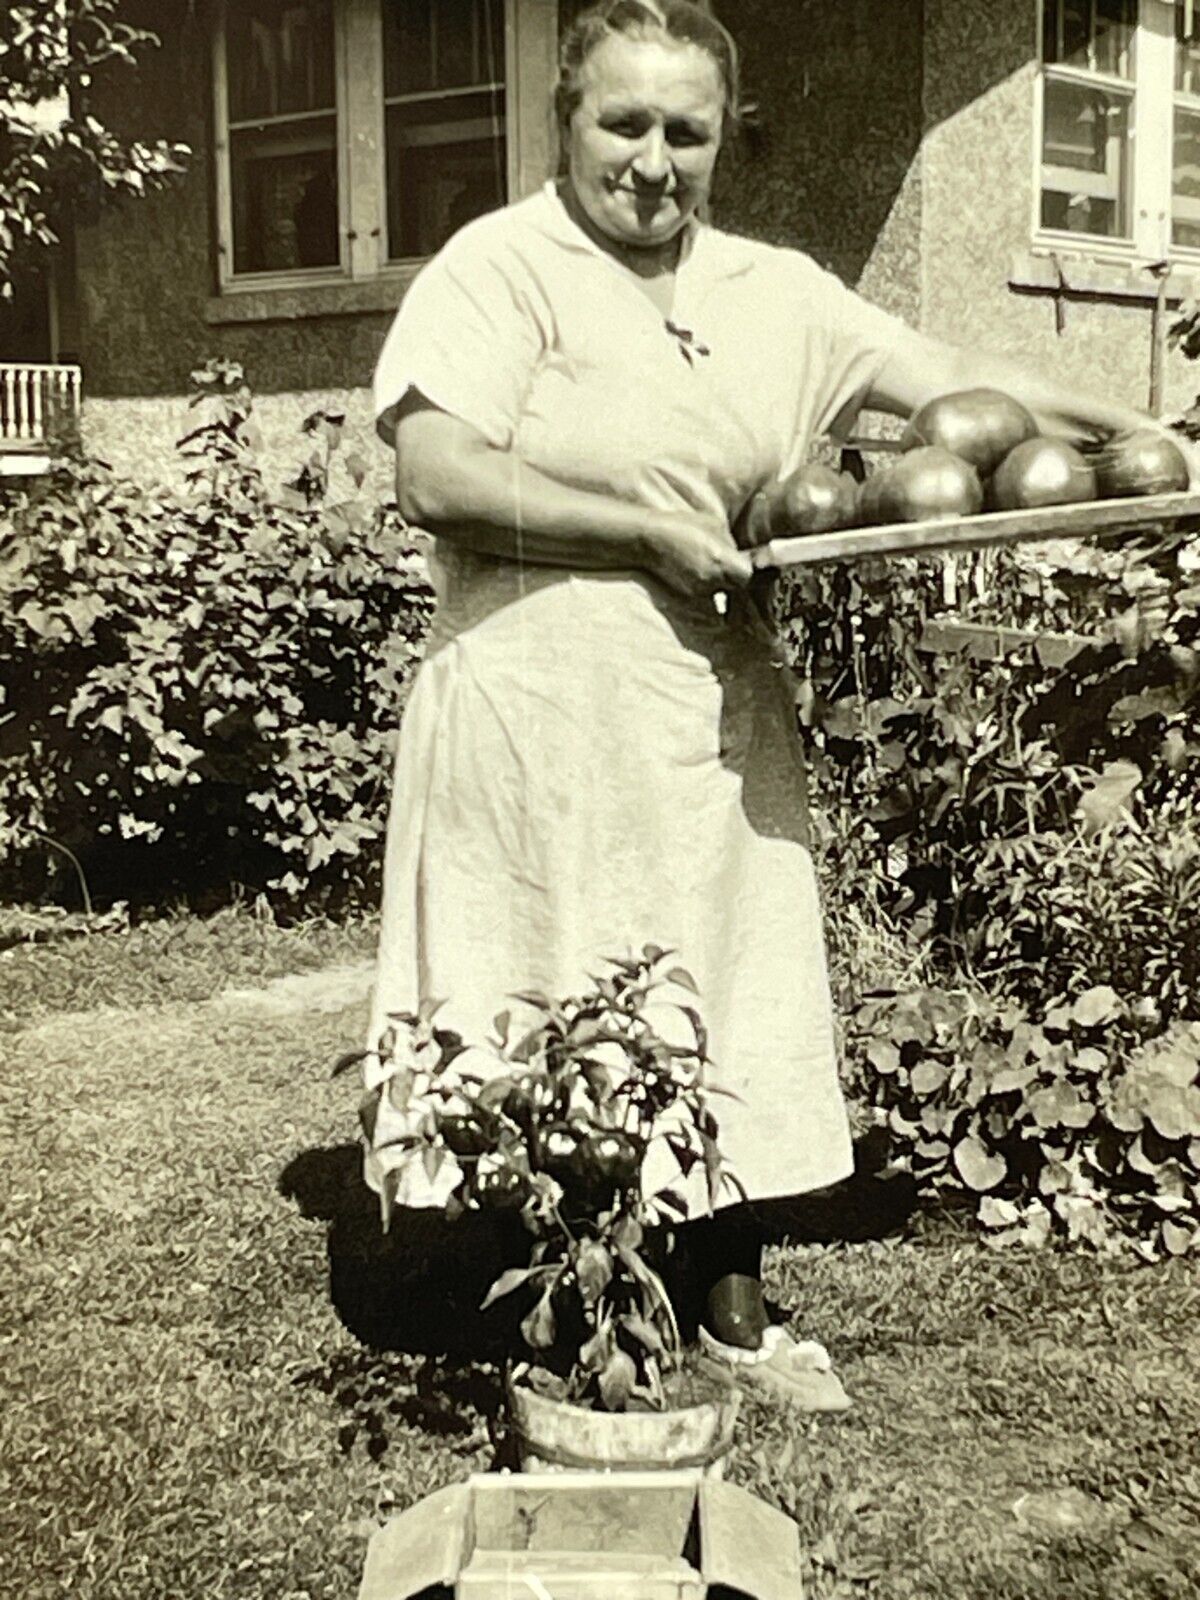 VE Photograph 1930-40's Old Woman Posing With Tomatoes In The Garden 